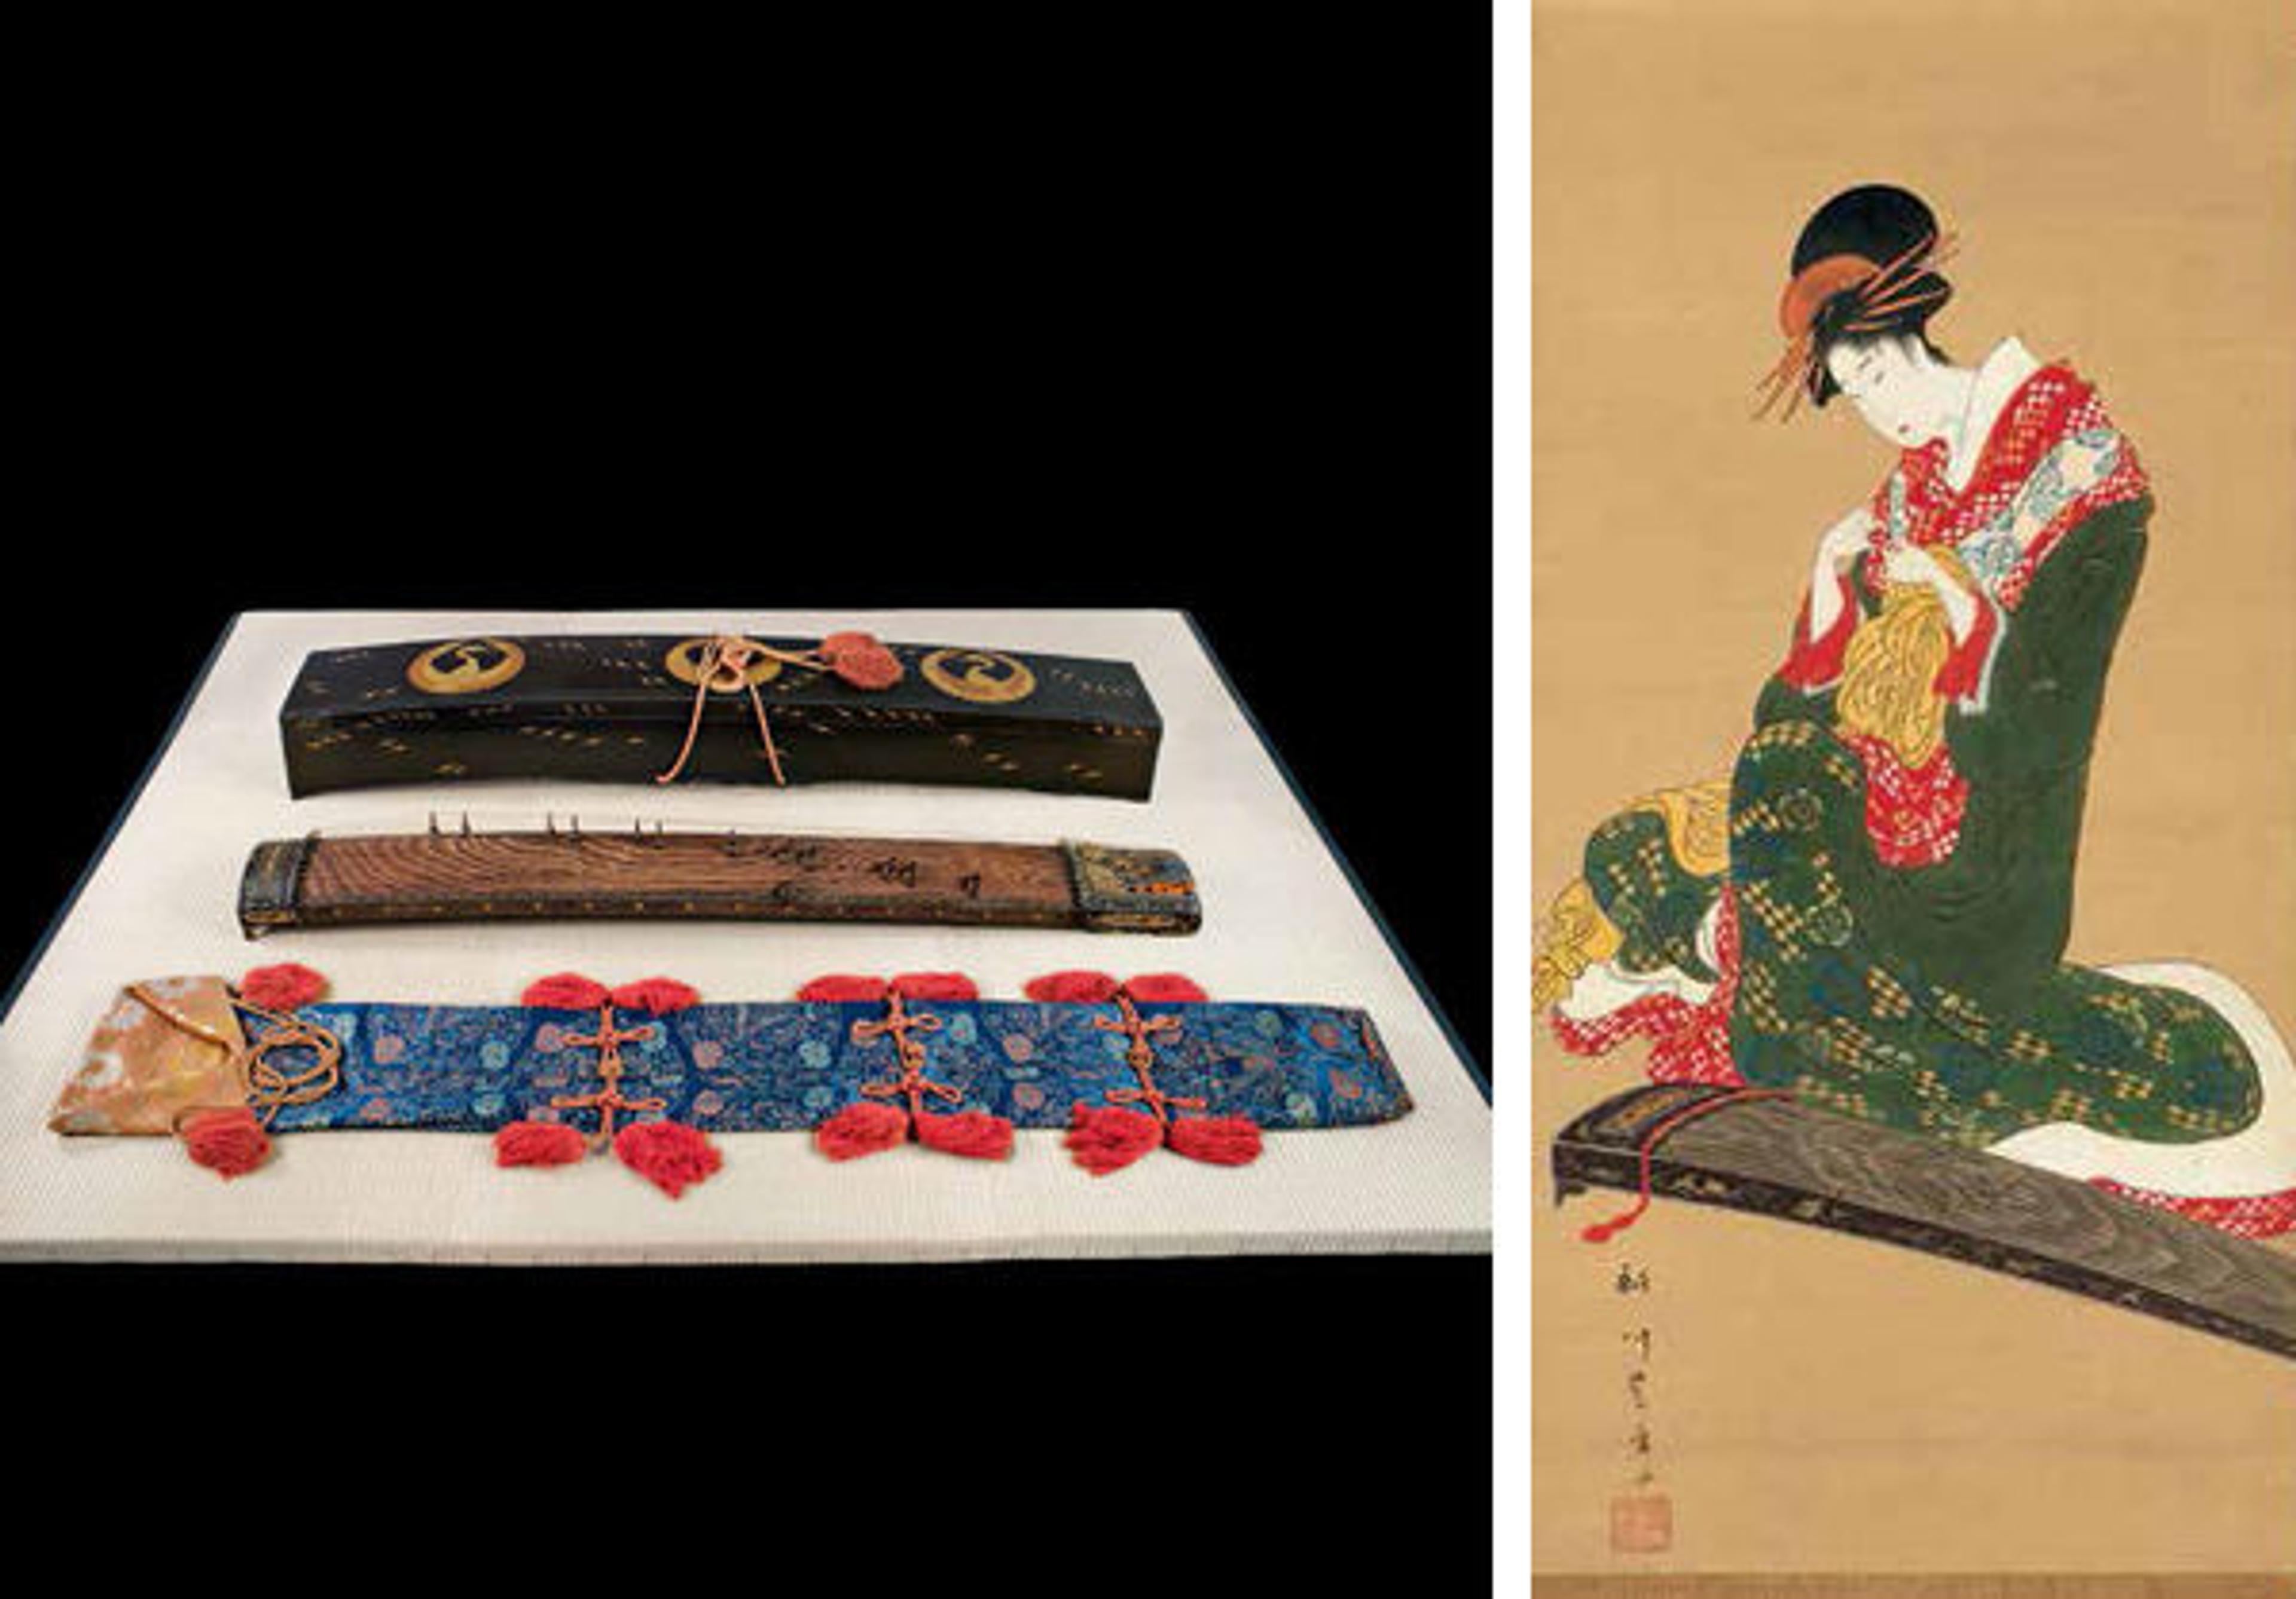 Koto; Woman Putting on Finger Plectrums to Play the Koto 